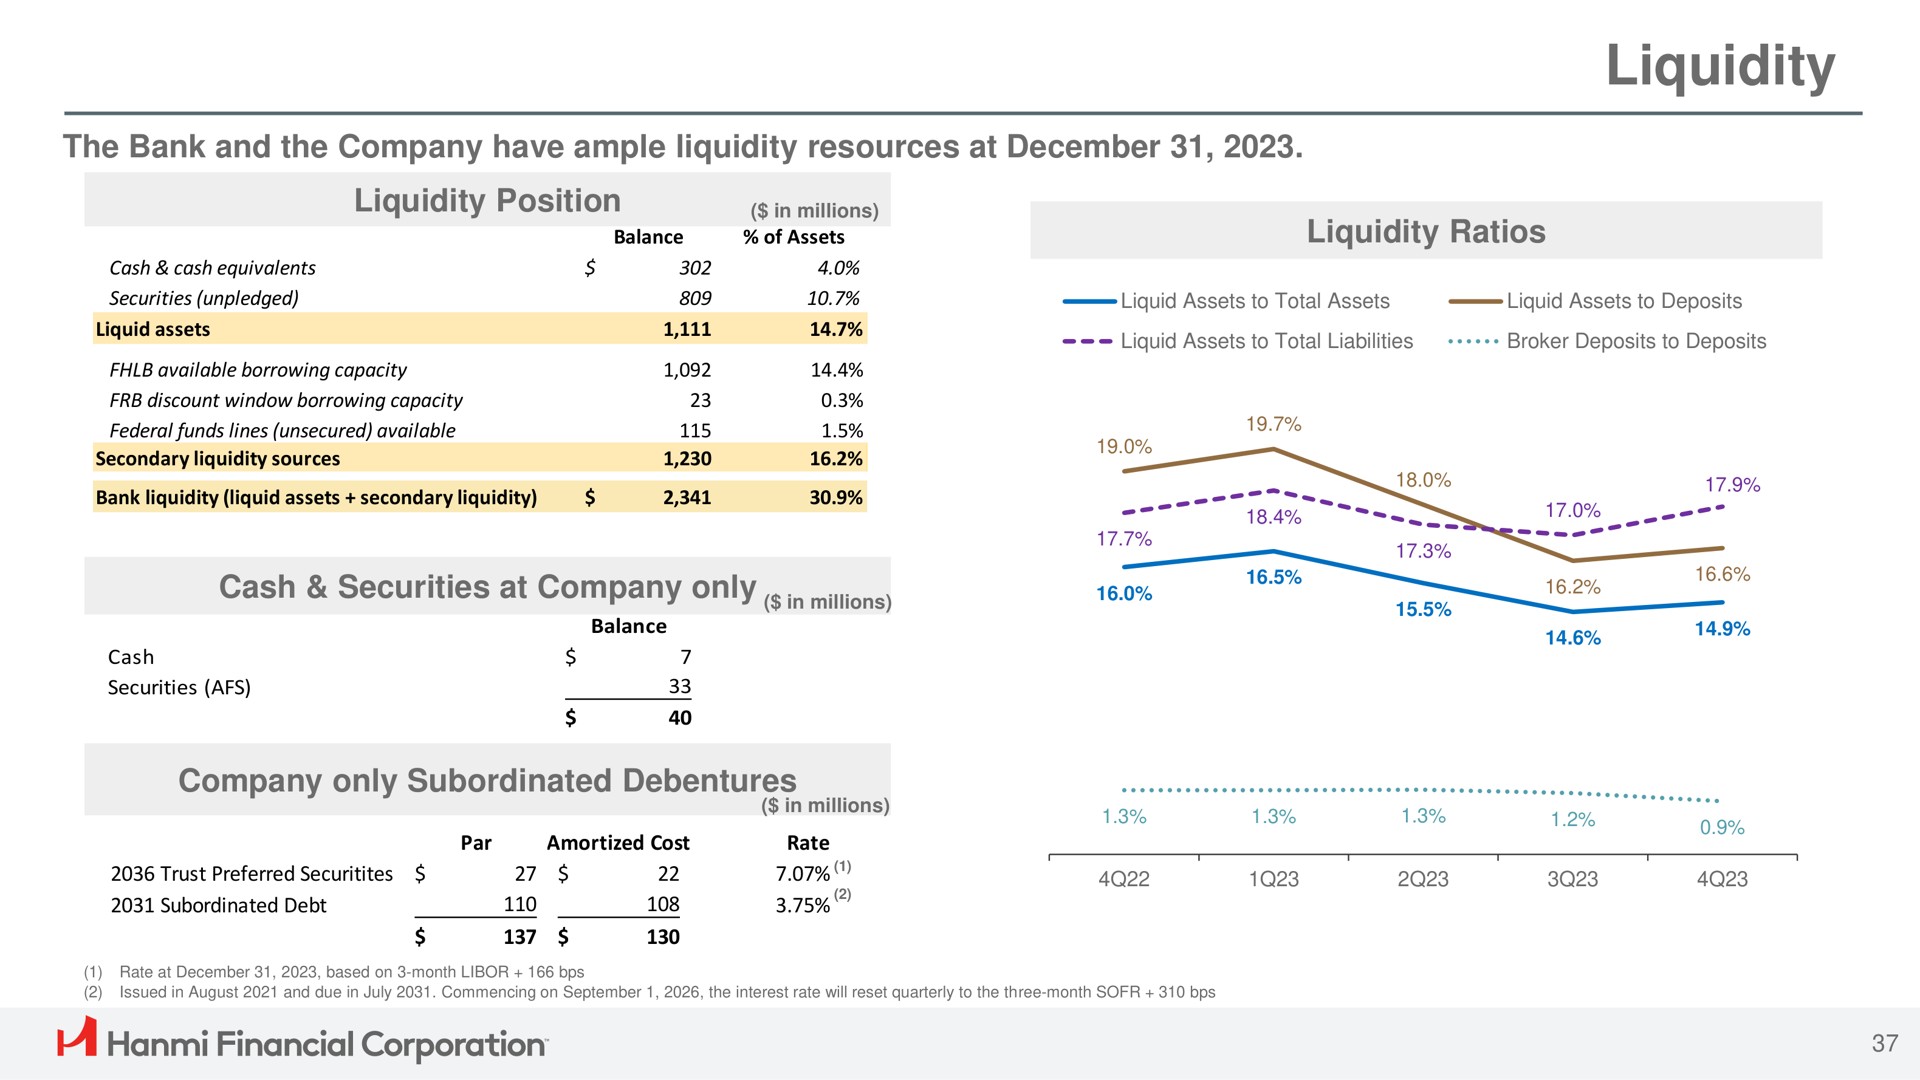 liquidity cash securities at company only tee financial corporation | Hanmi Financial